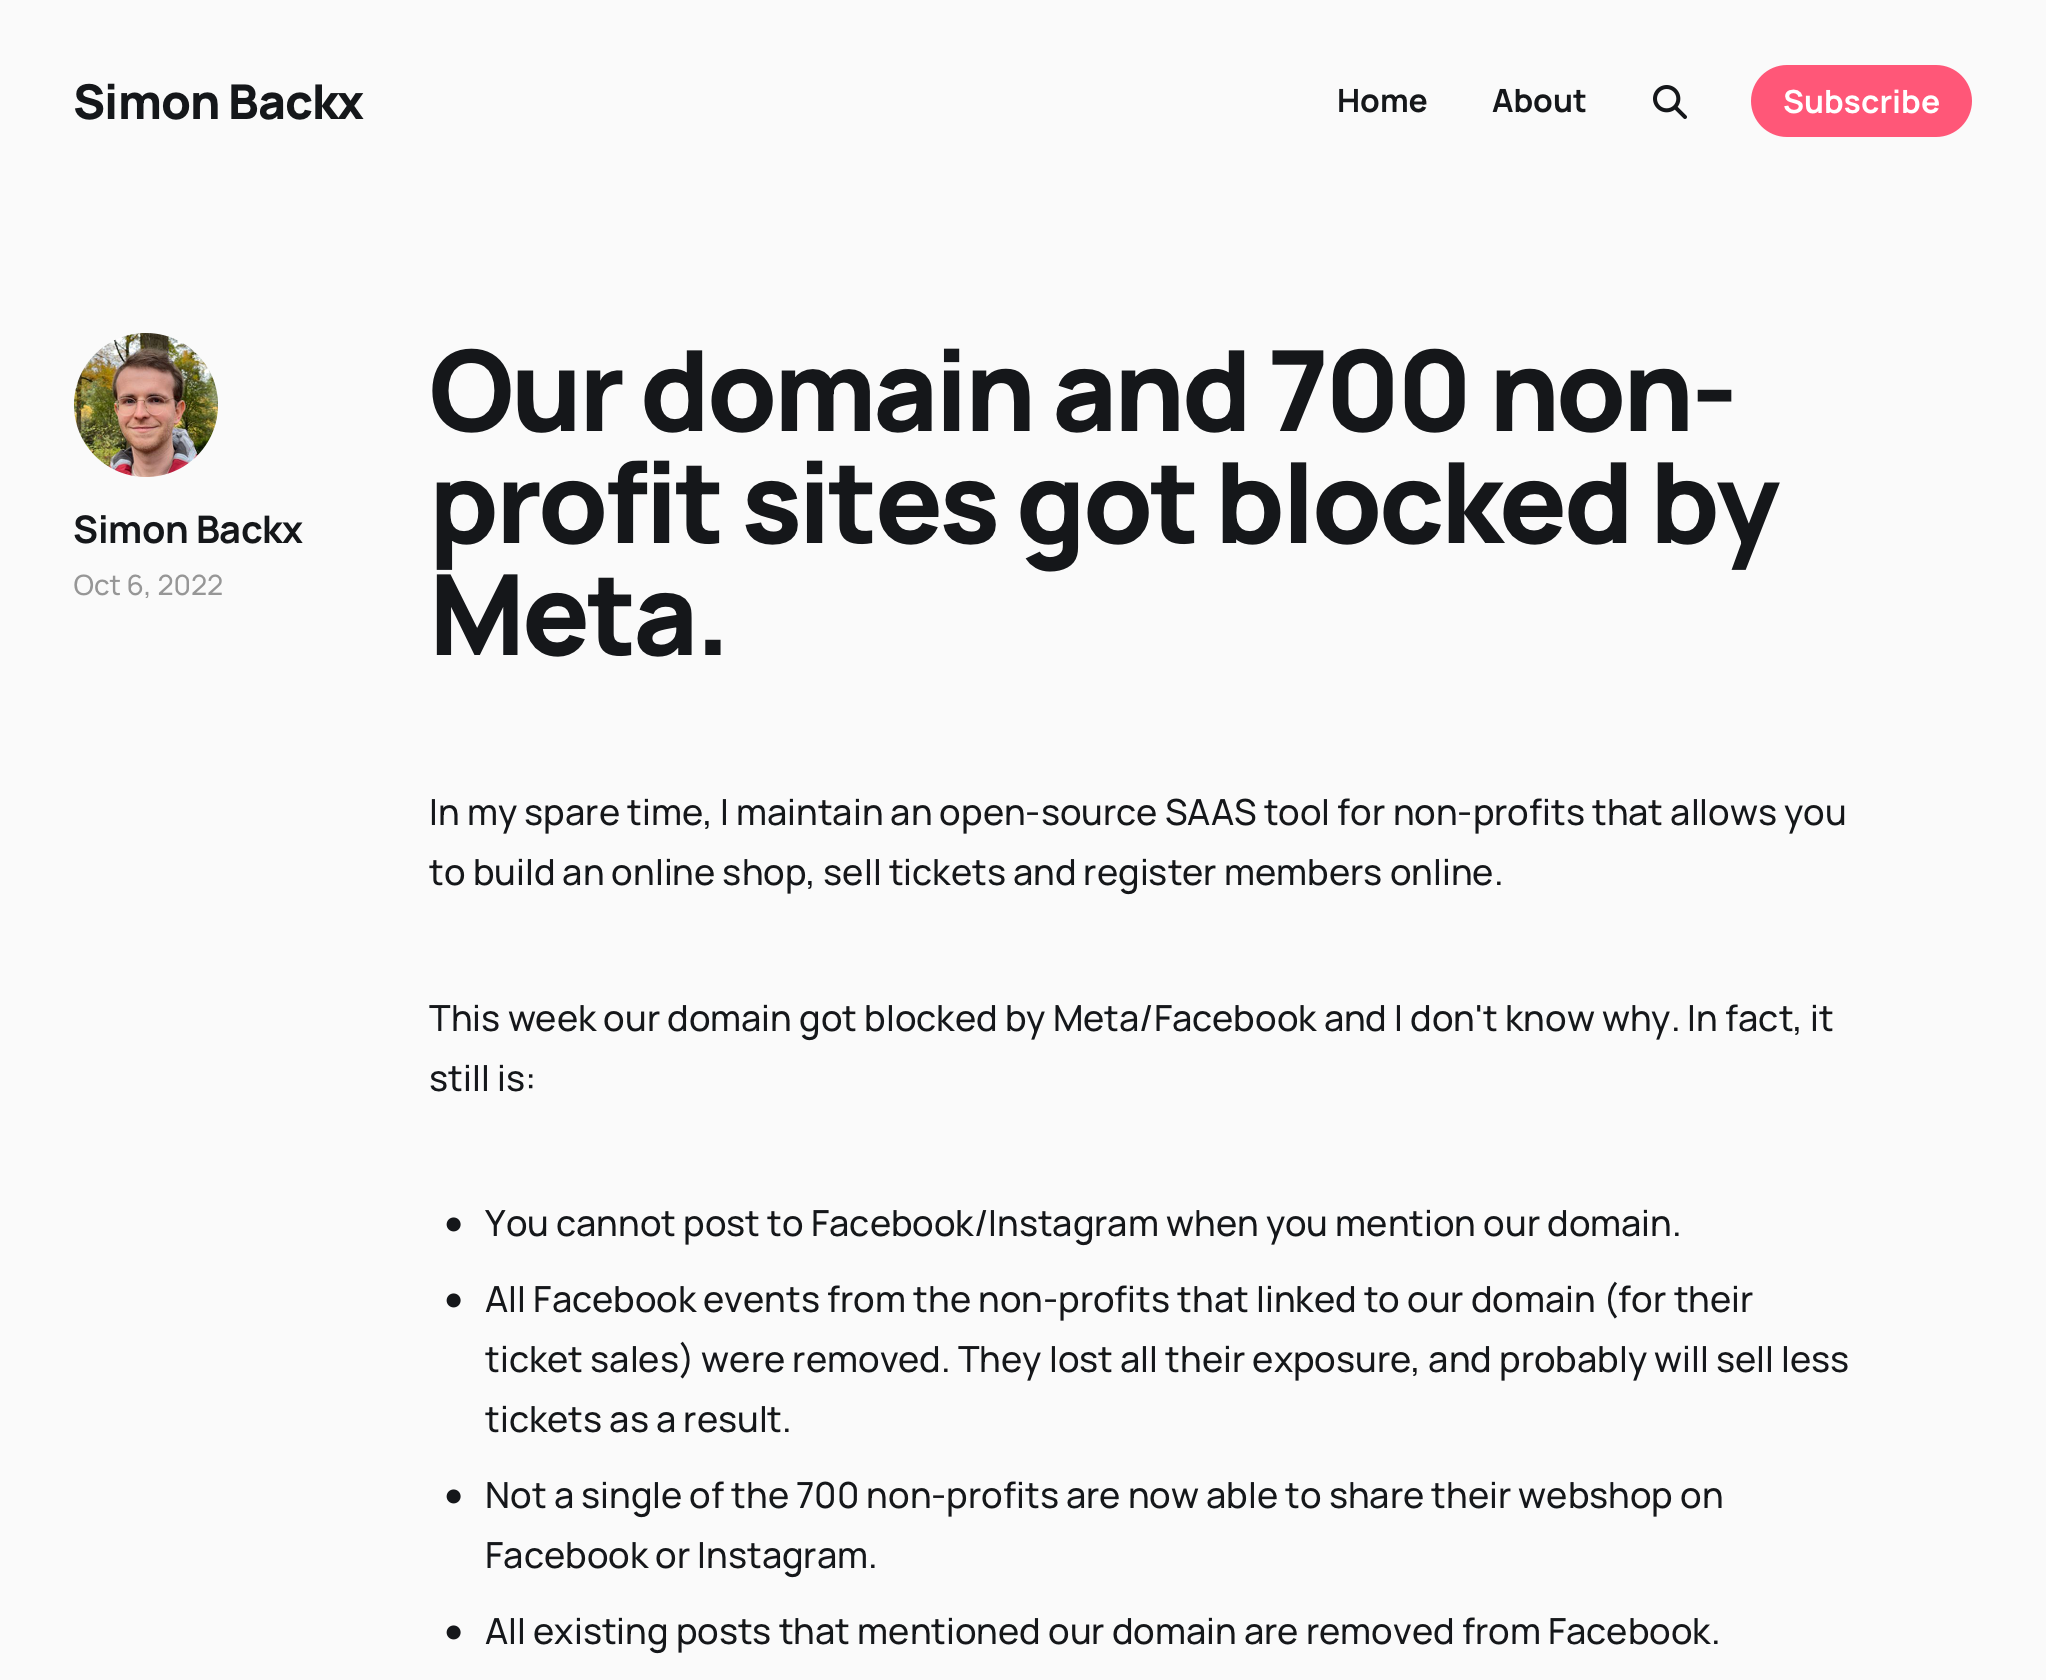 Our domain and 700 non-profit sites got blocked by Meta